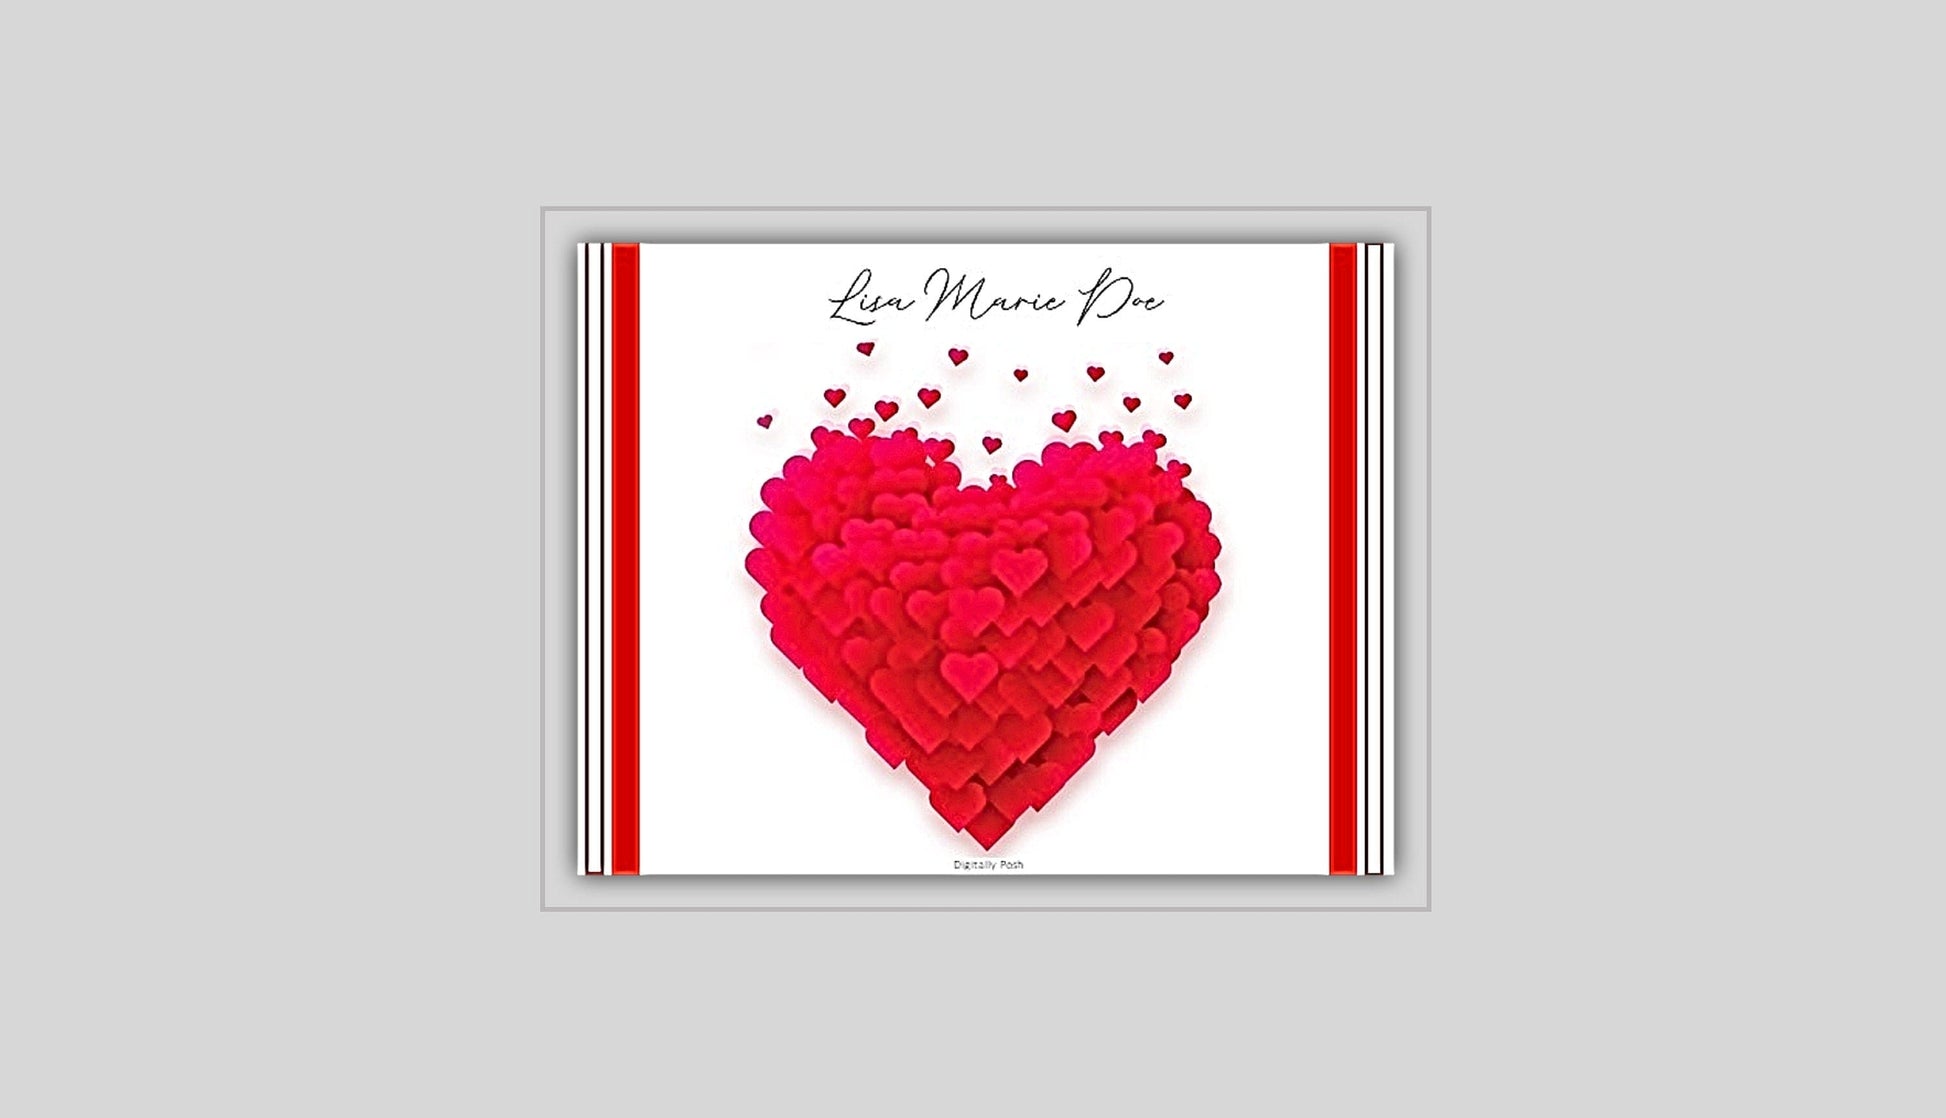 Personalized Note Card: Add a Personal Touch with Customized Stationery for Every Occasion. Power Of Love Note Cards | Personalized Stationary Card | Digital Notecards | Printable Note Cards | Custom Gift Idea | Instant Download PDF